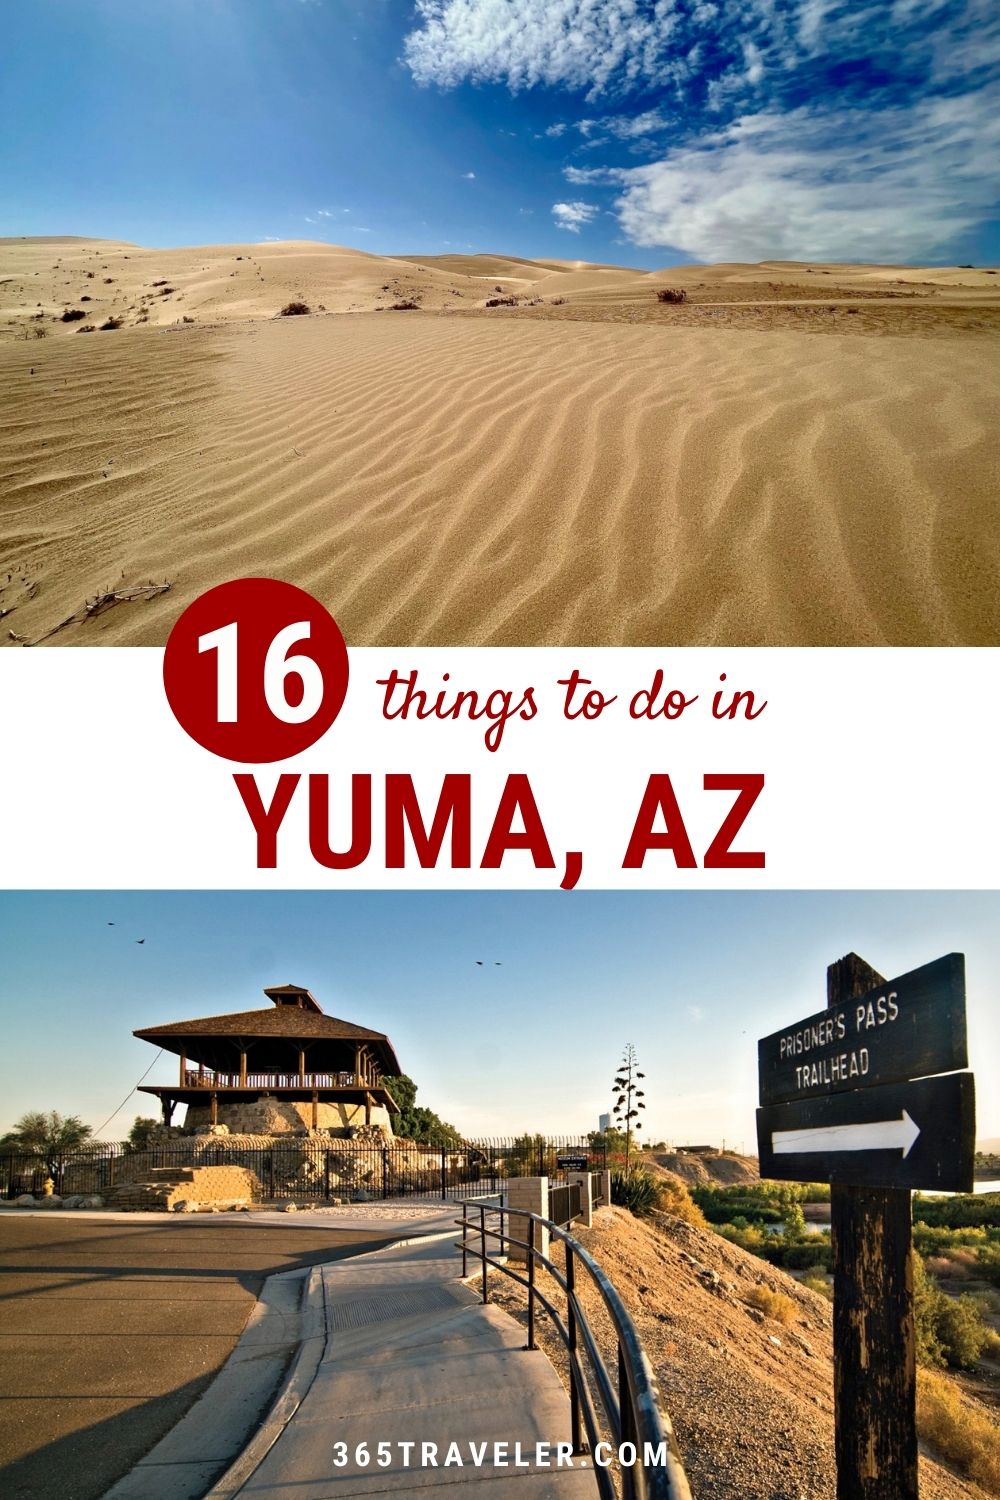 16 AMAZING THINGS TO DO IN YUMA AZ YOU CAN'T MISS